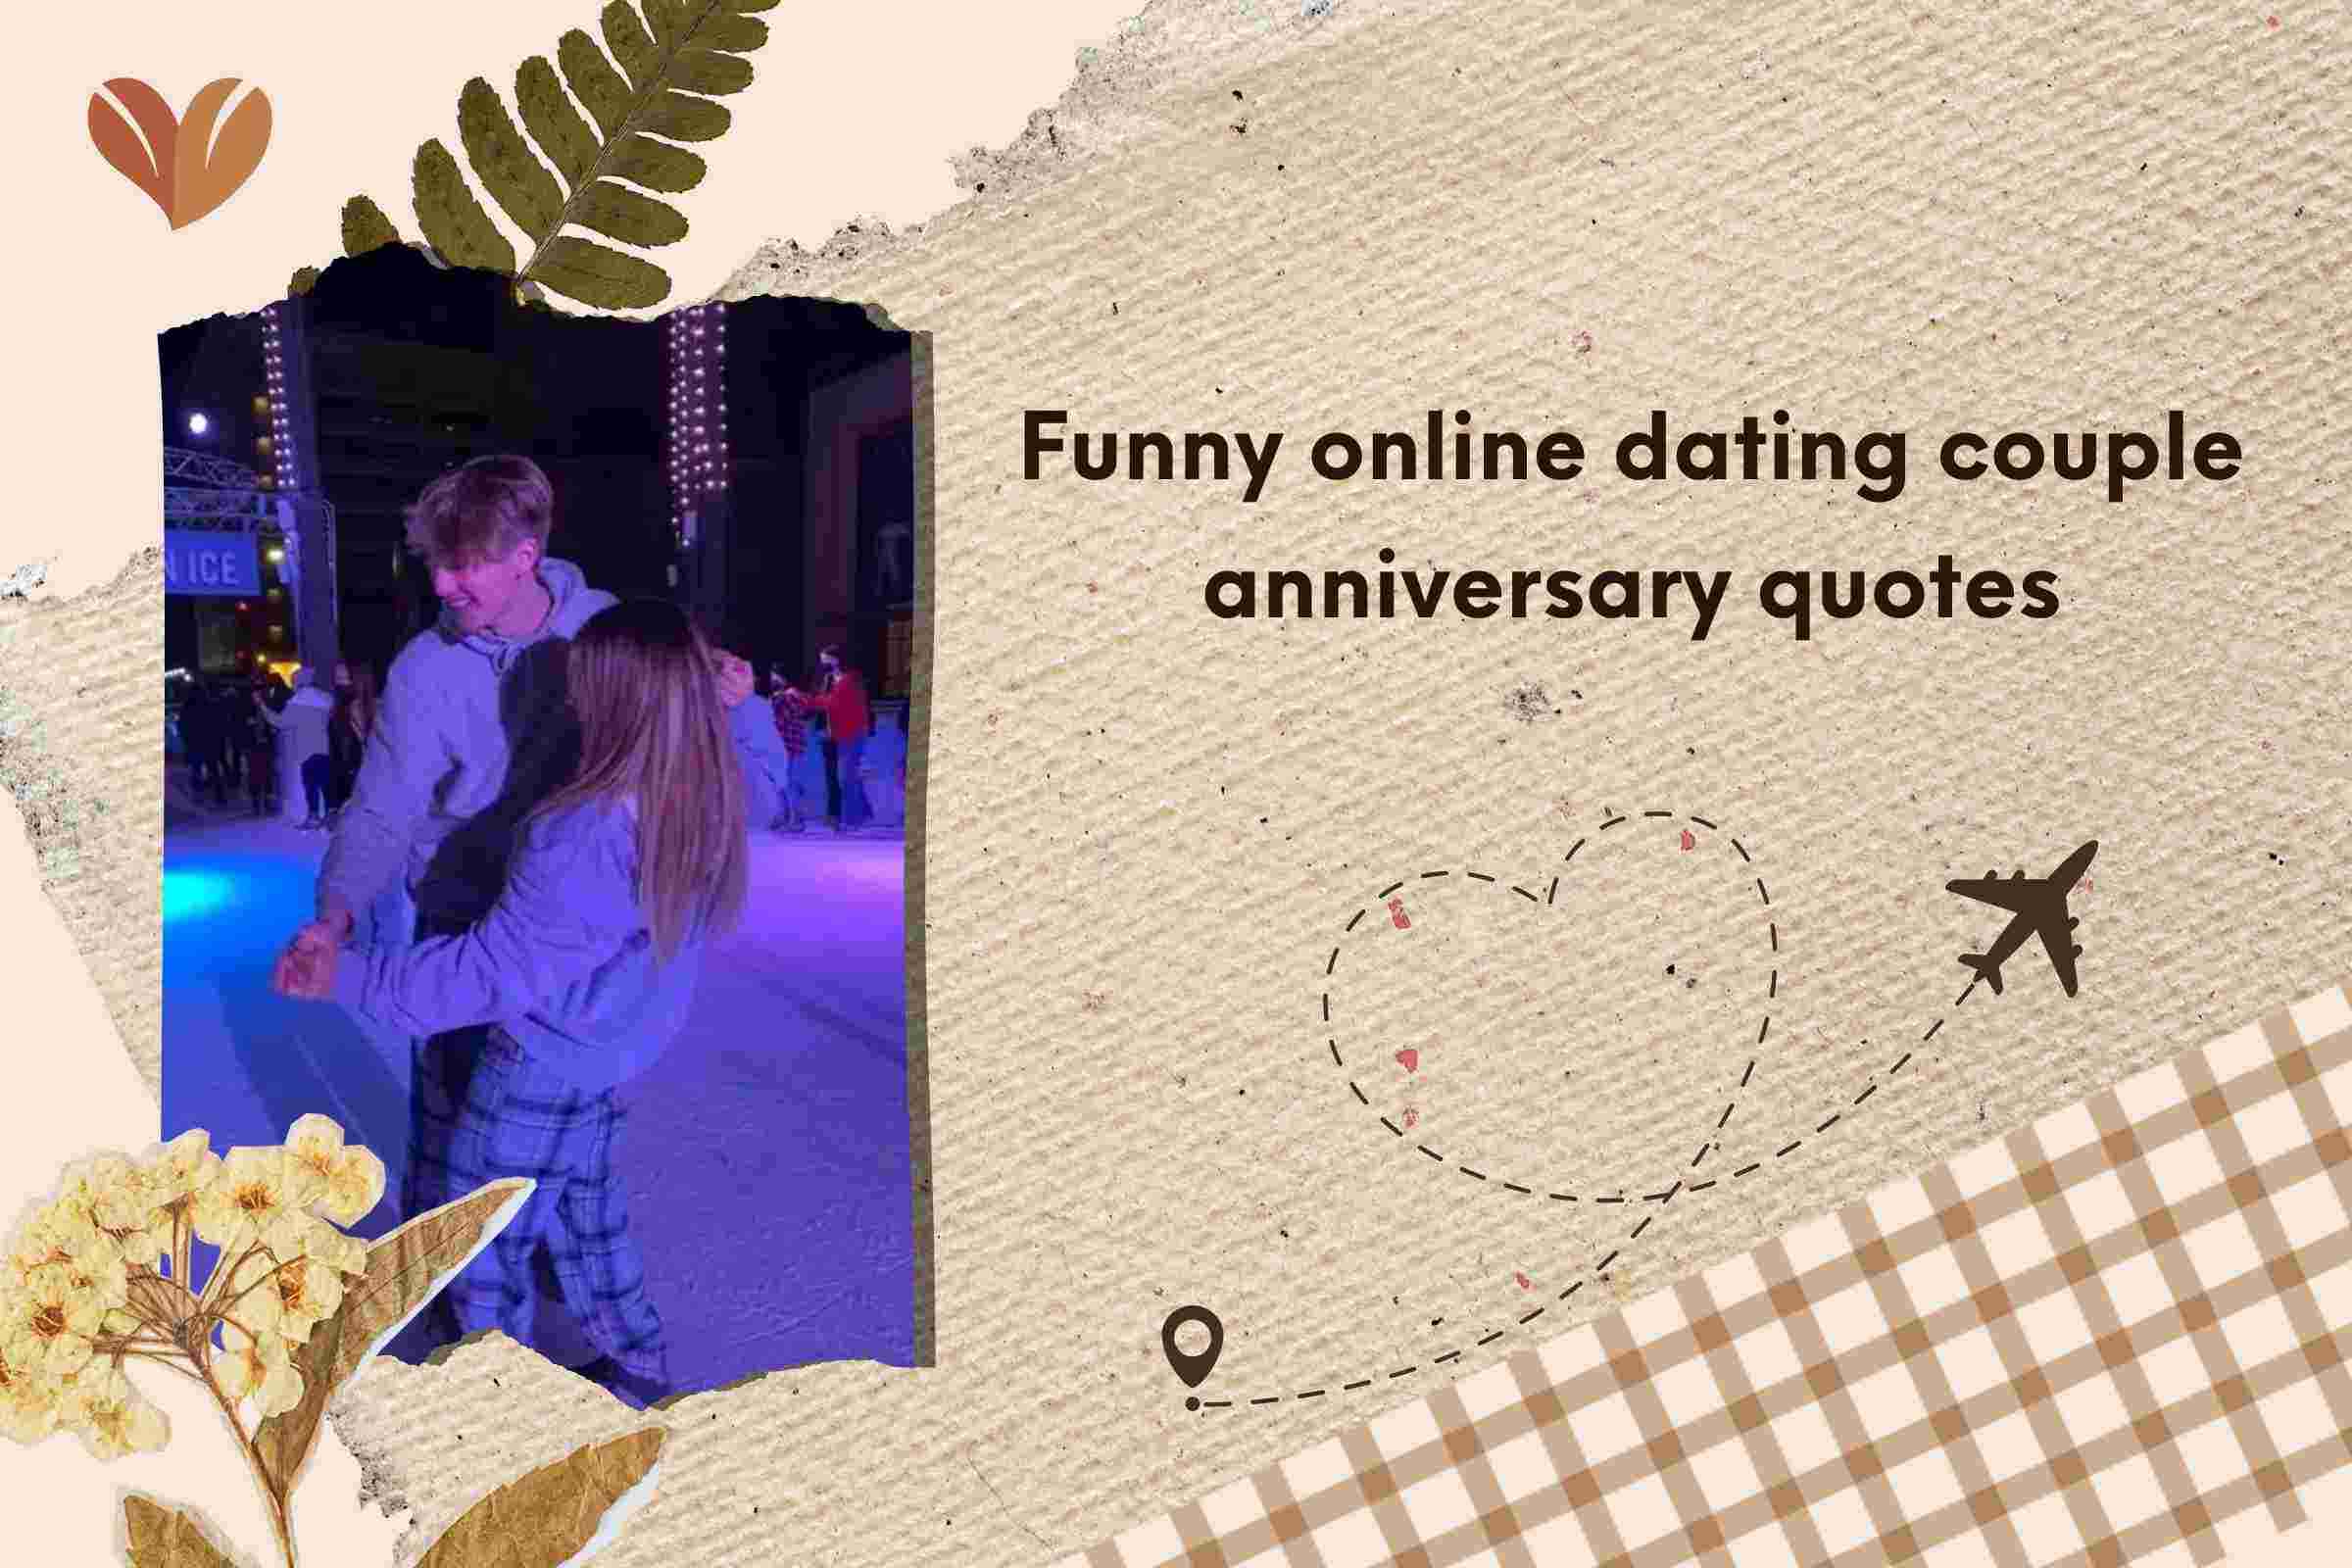 Funny online dating couple anniversary quotes